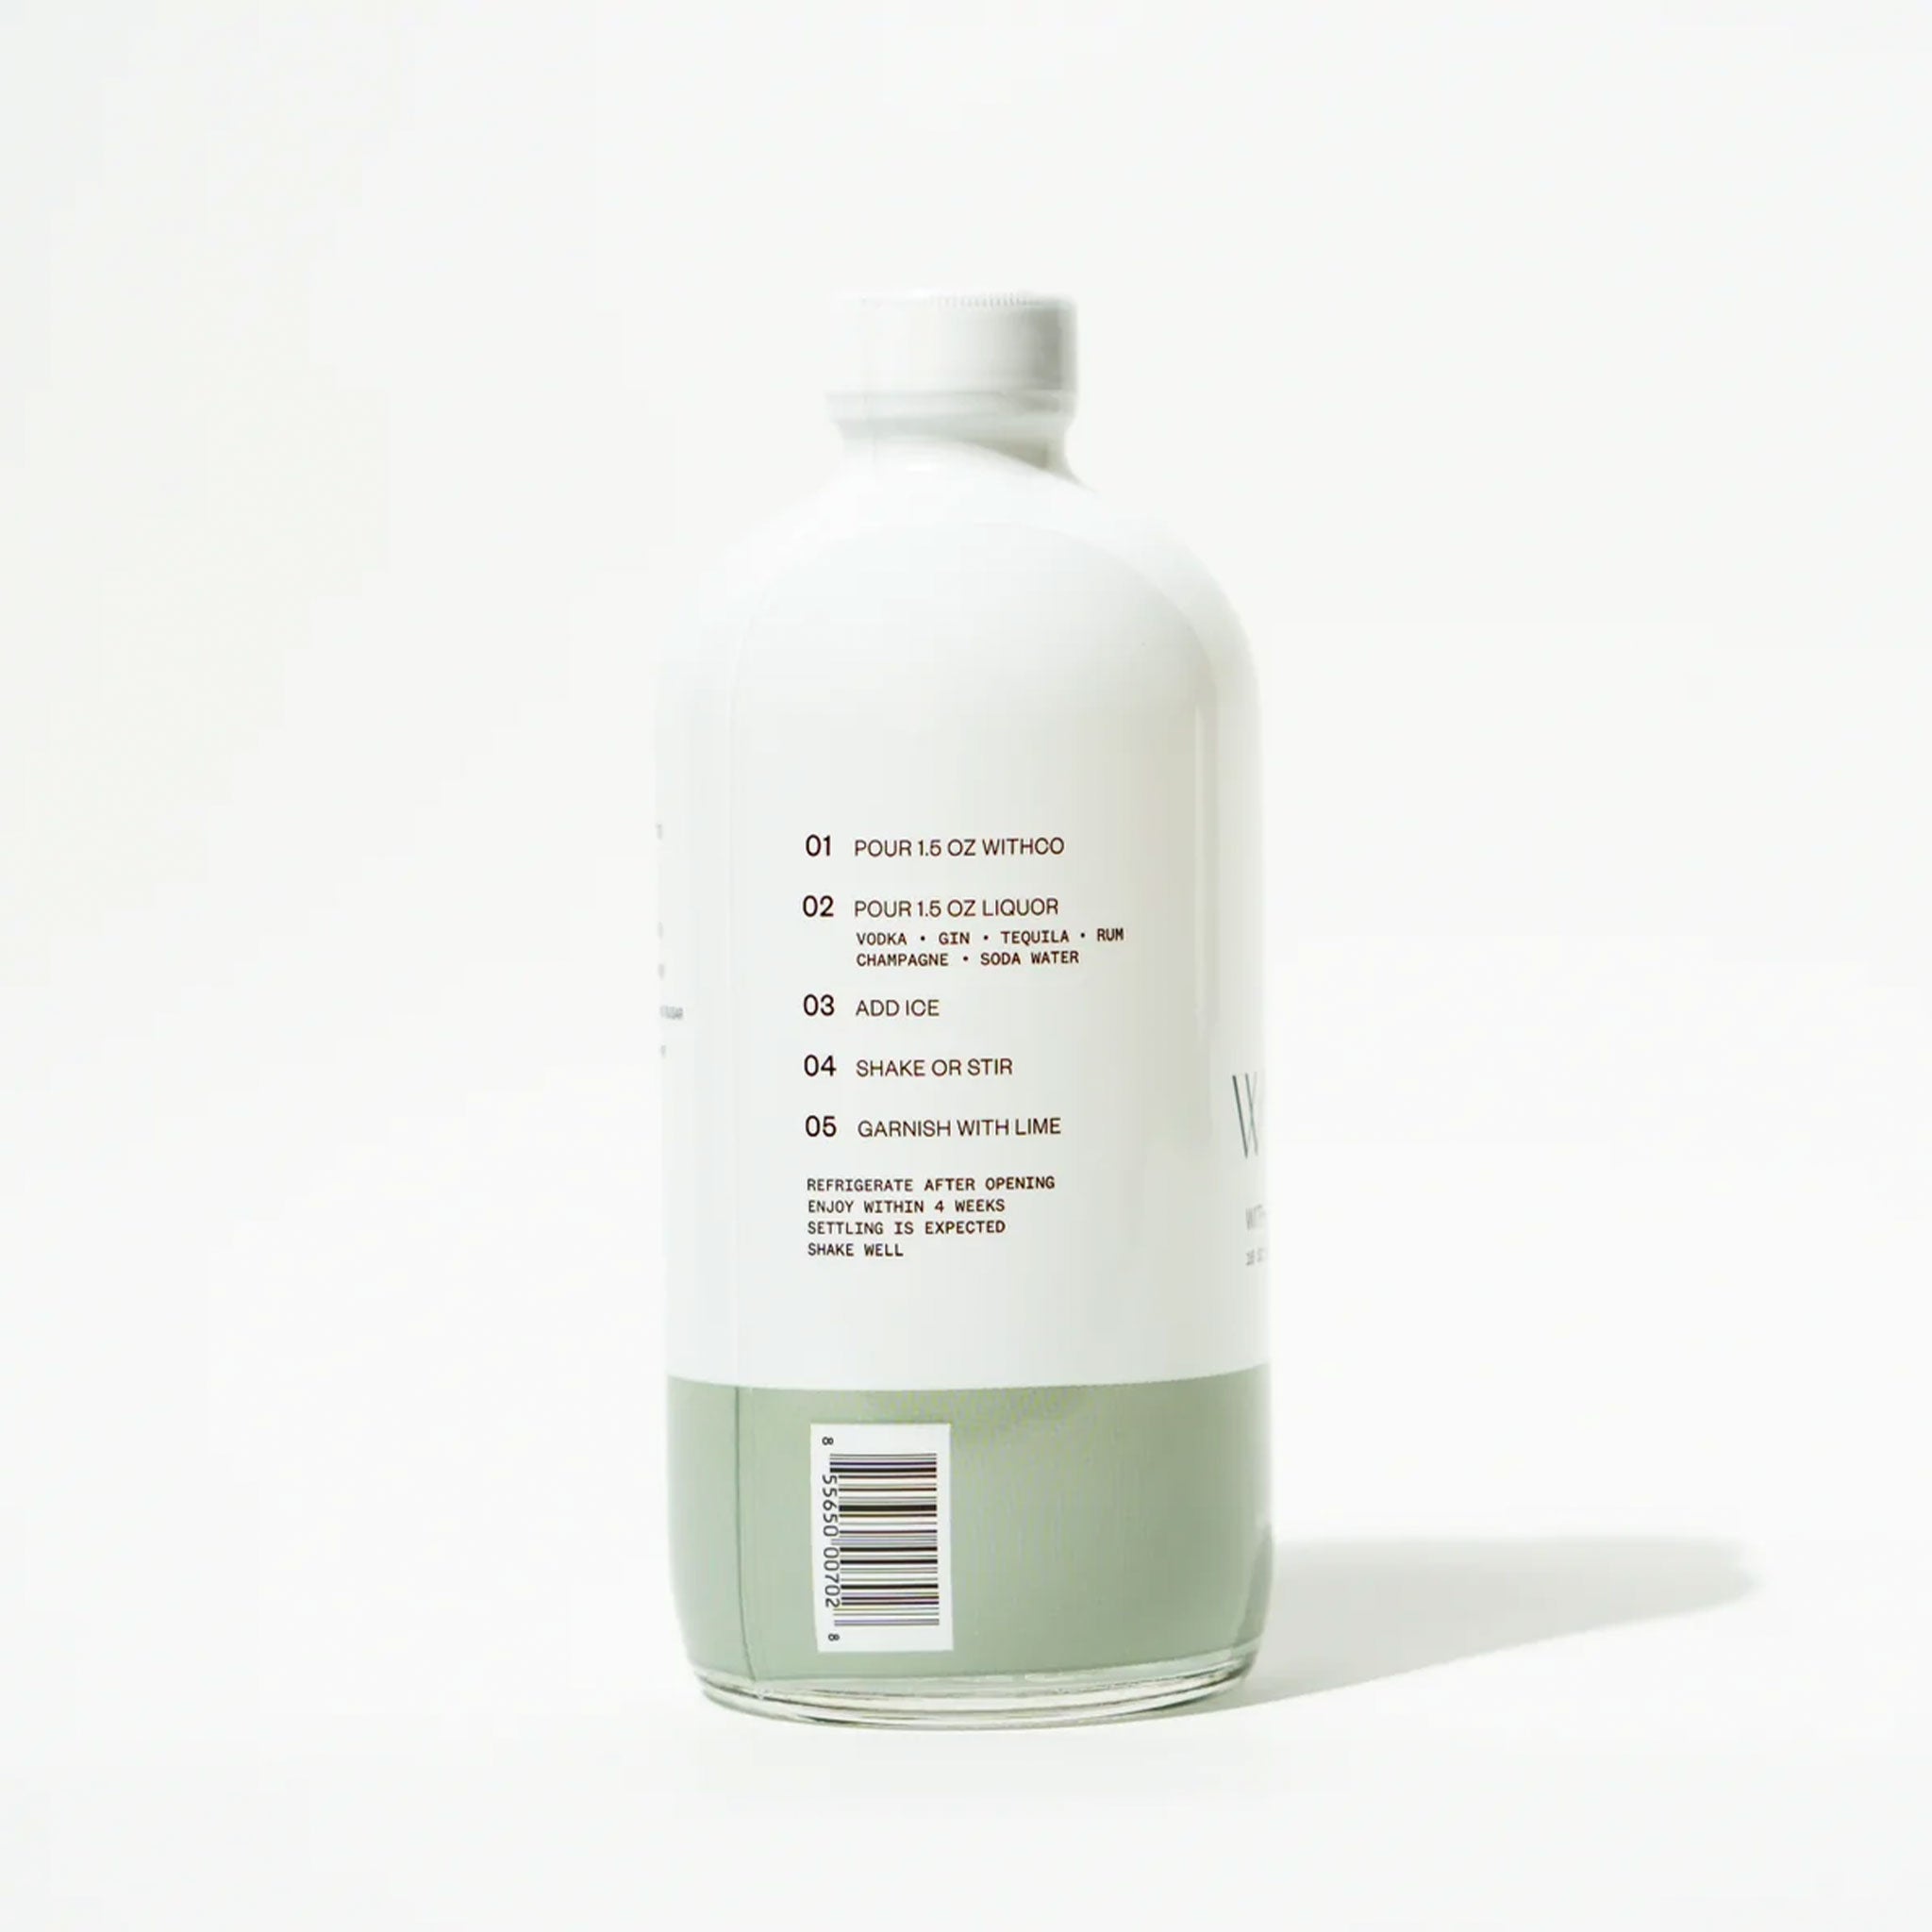 A white container with a sage green bottom half along with the brand &quot;With Co&quot; written in black text along with the name of the cocktail mix &quot;Hey Girl&quot; in white text on the green background.